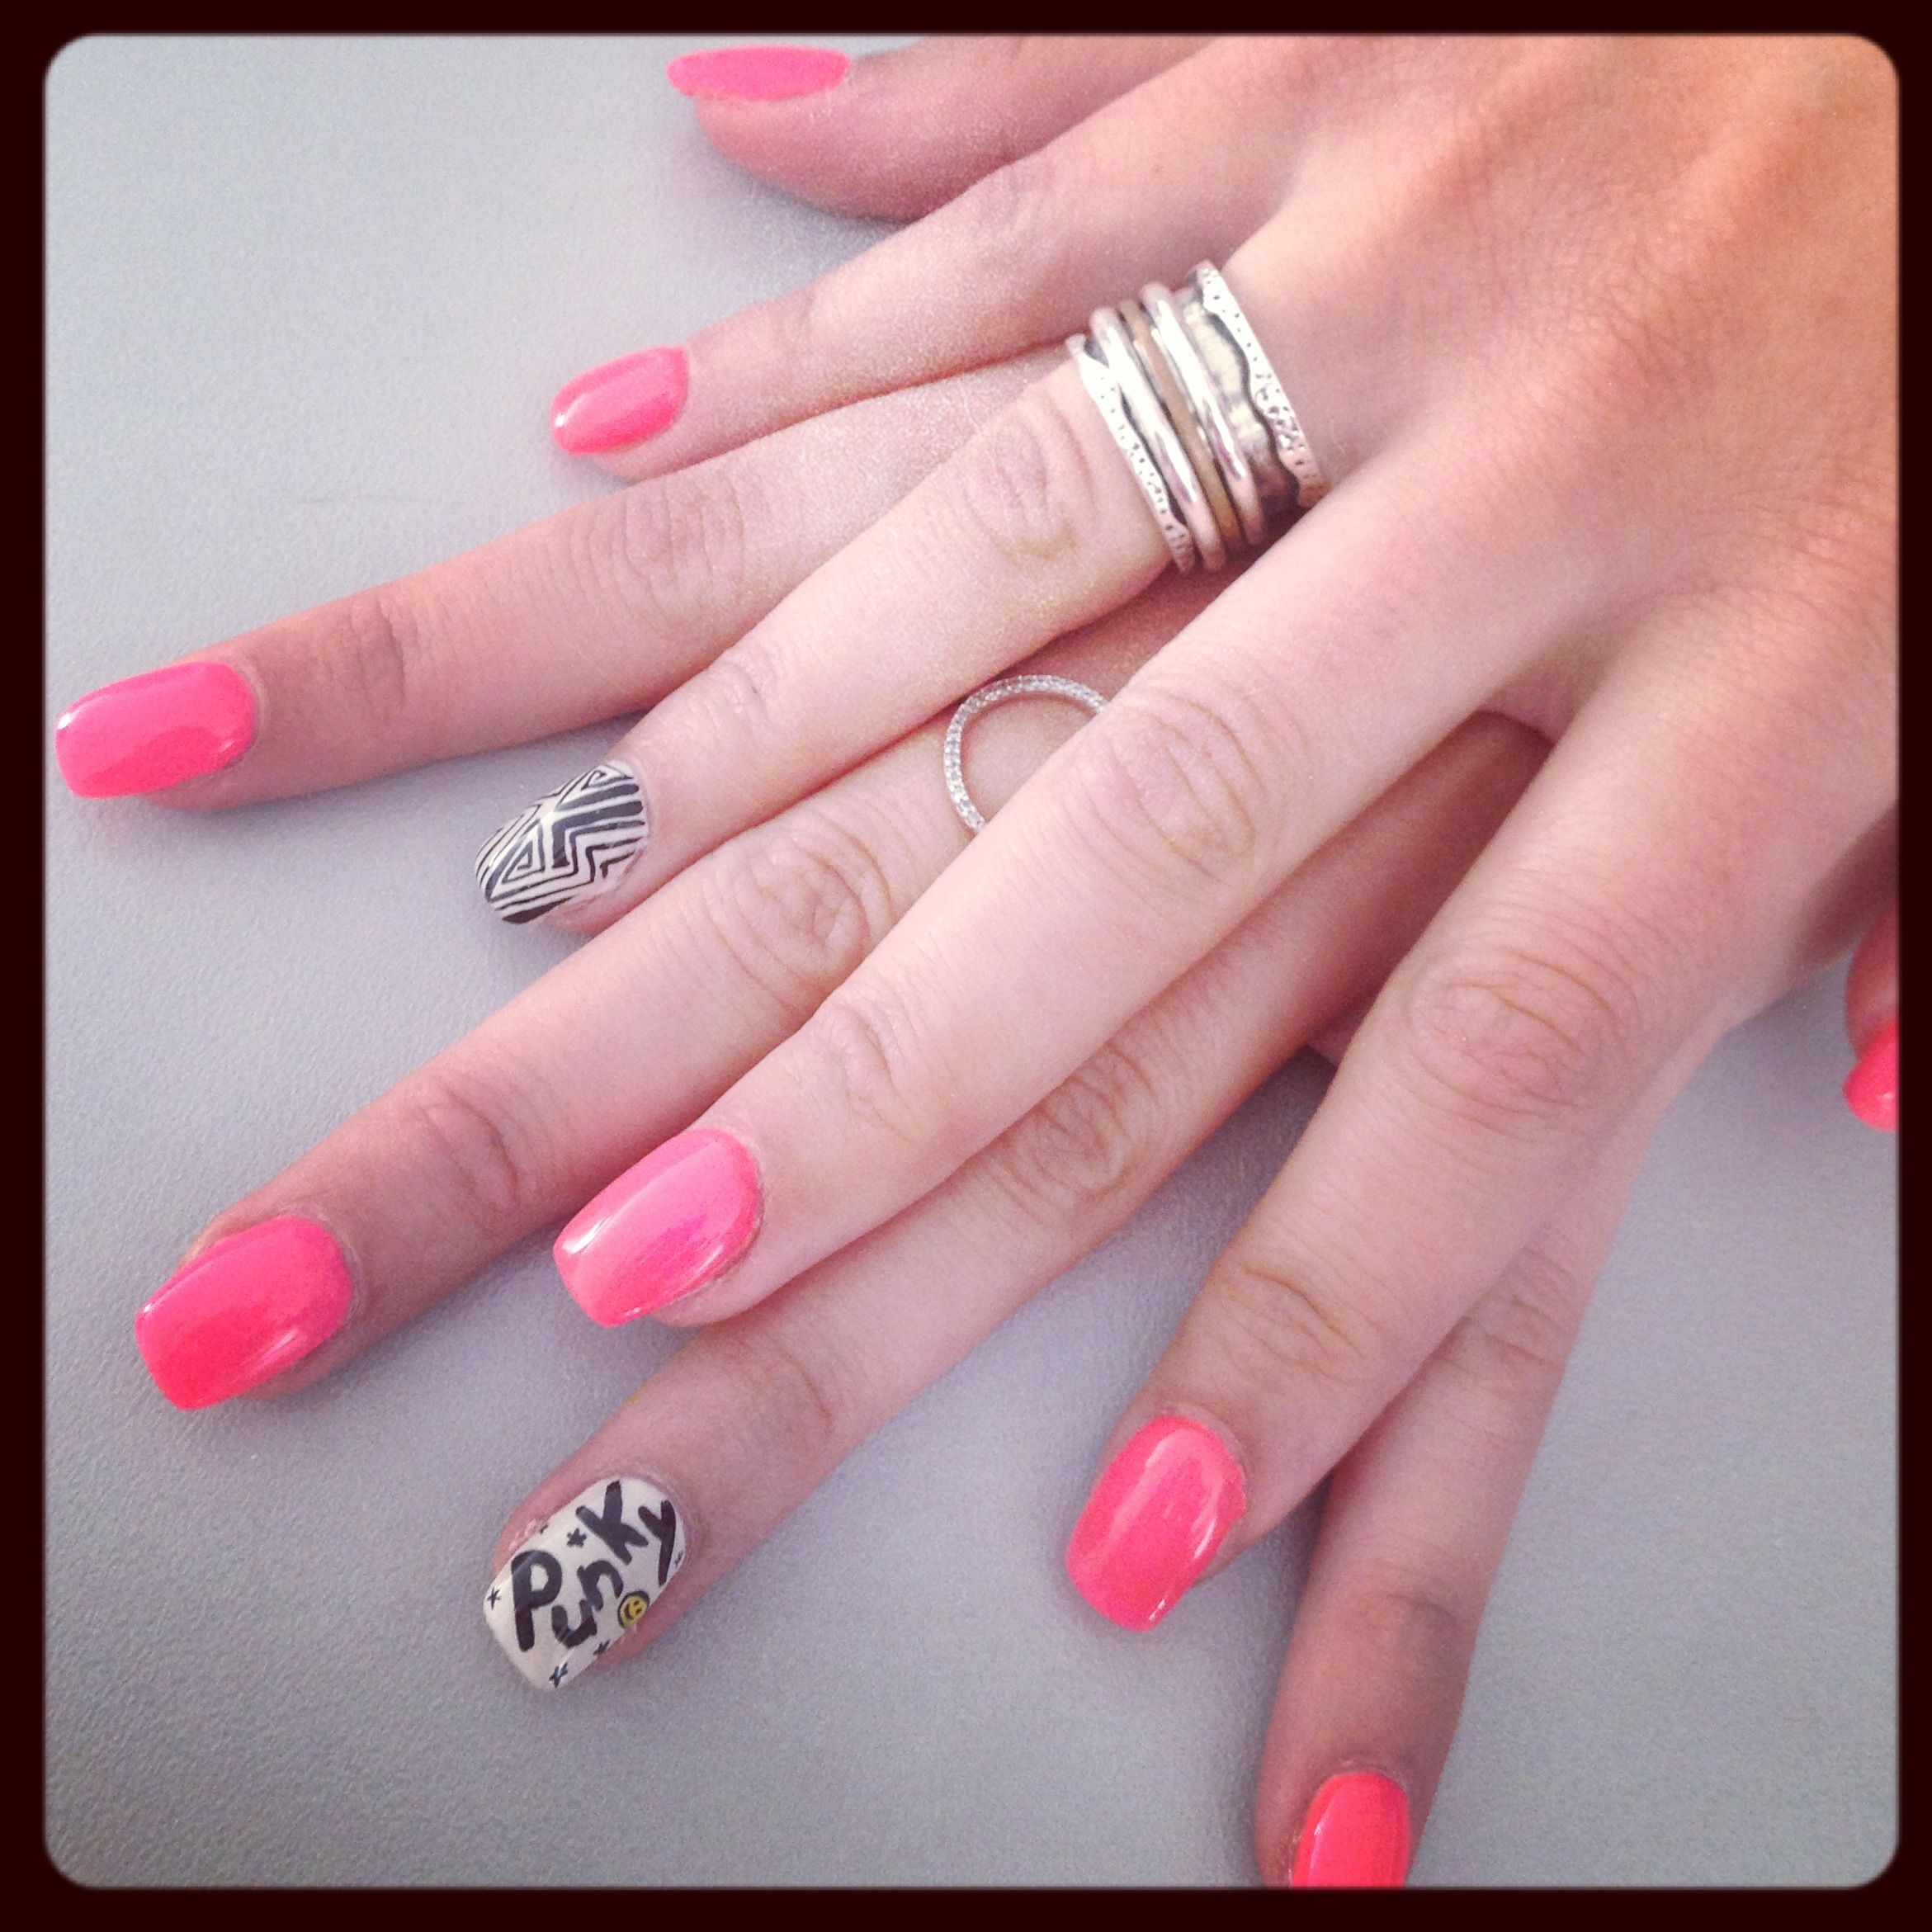 Nails Nailsart Ongles Rose Fluo Ongles Qui Changent De Couleurs Jewelry tout Ongle Rose Fluo